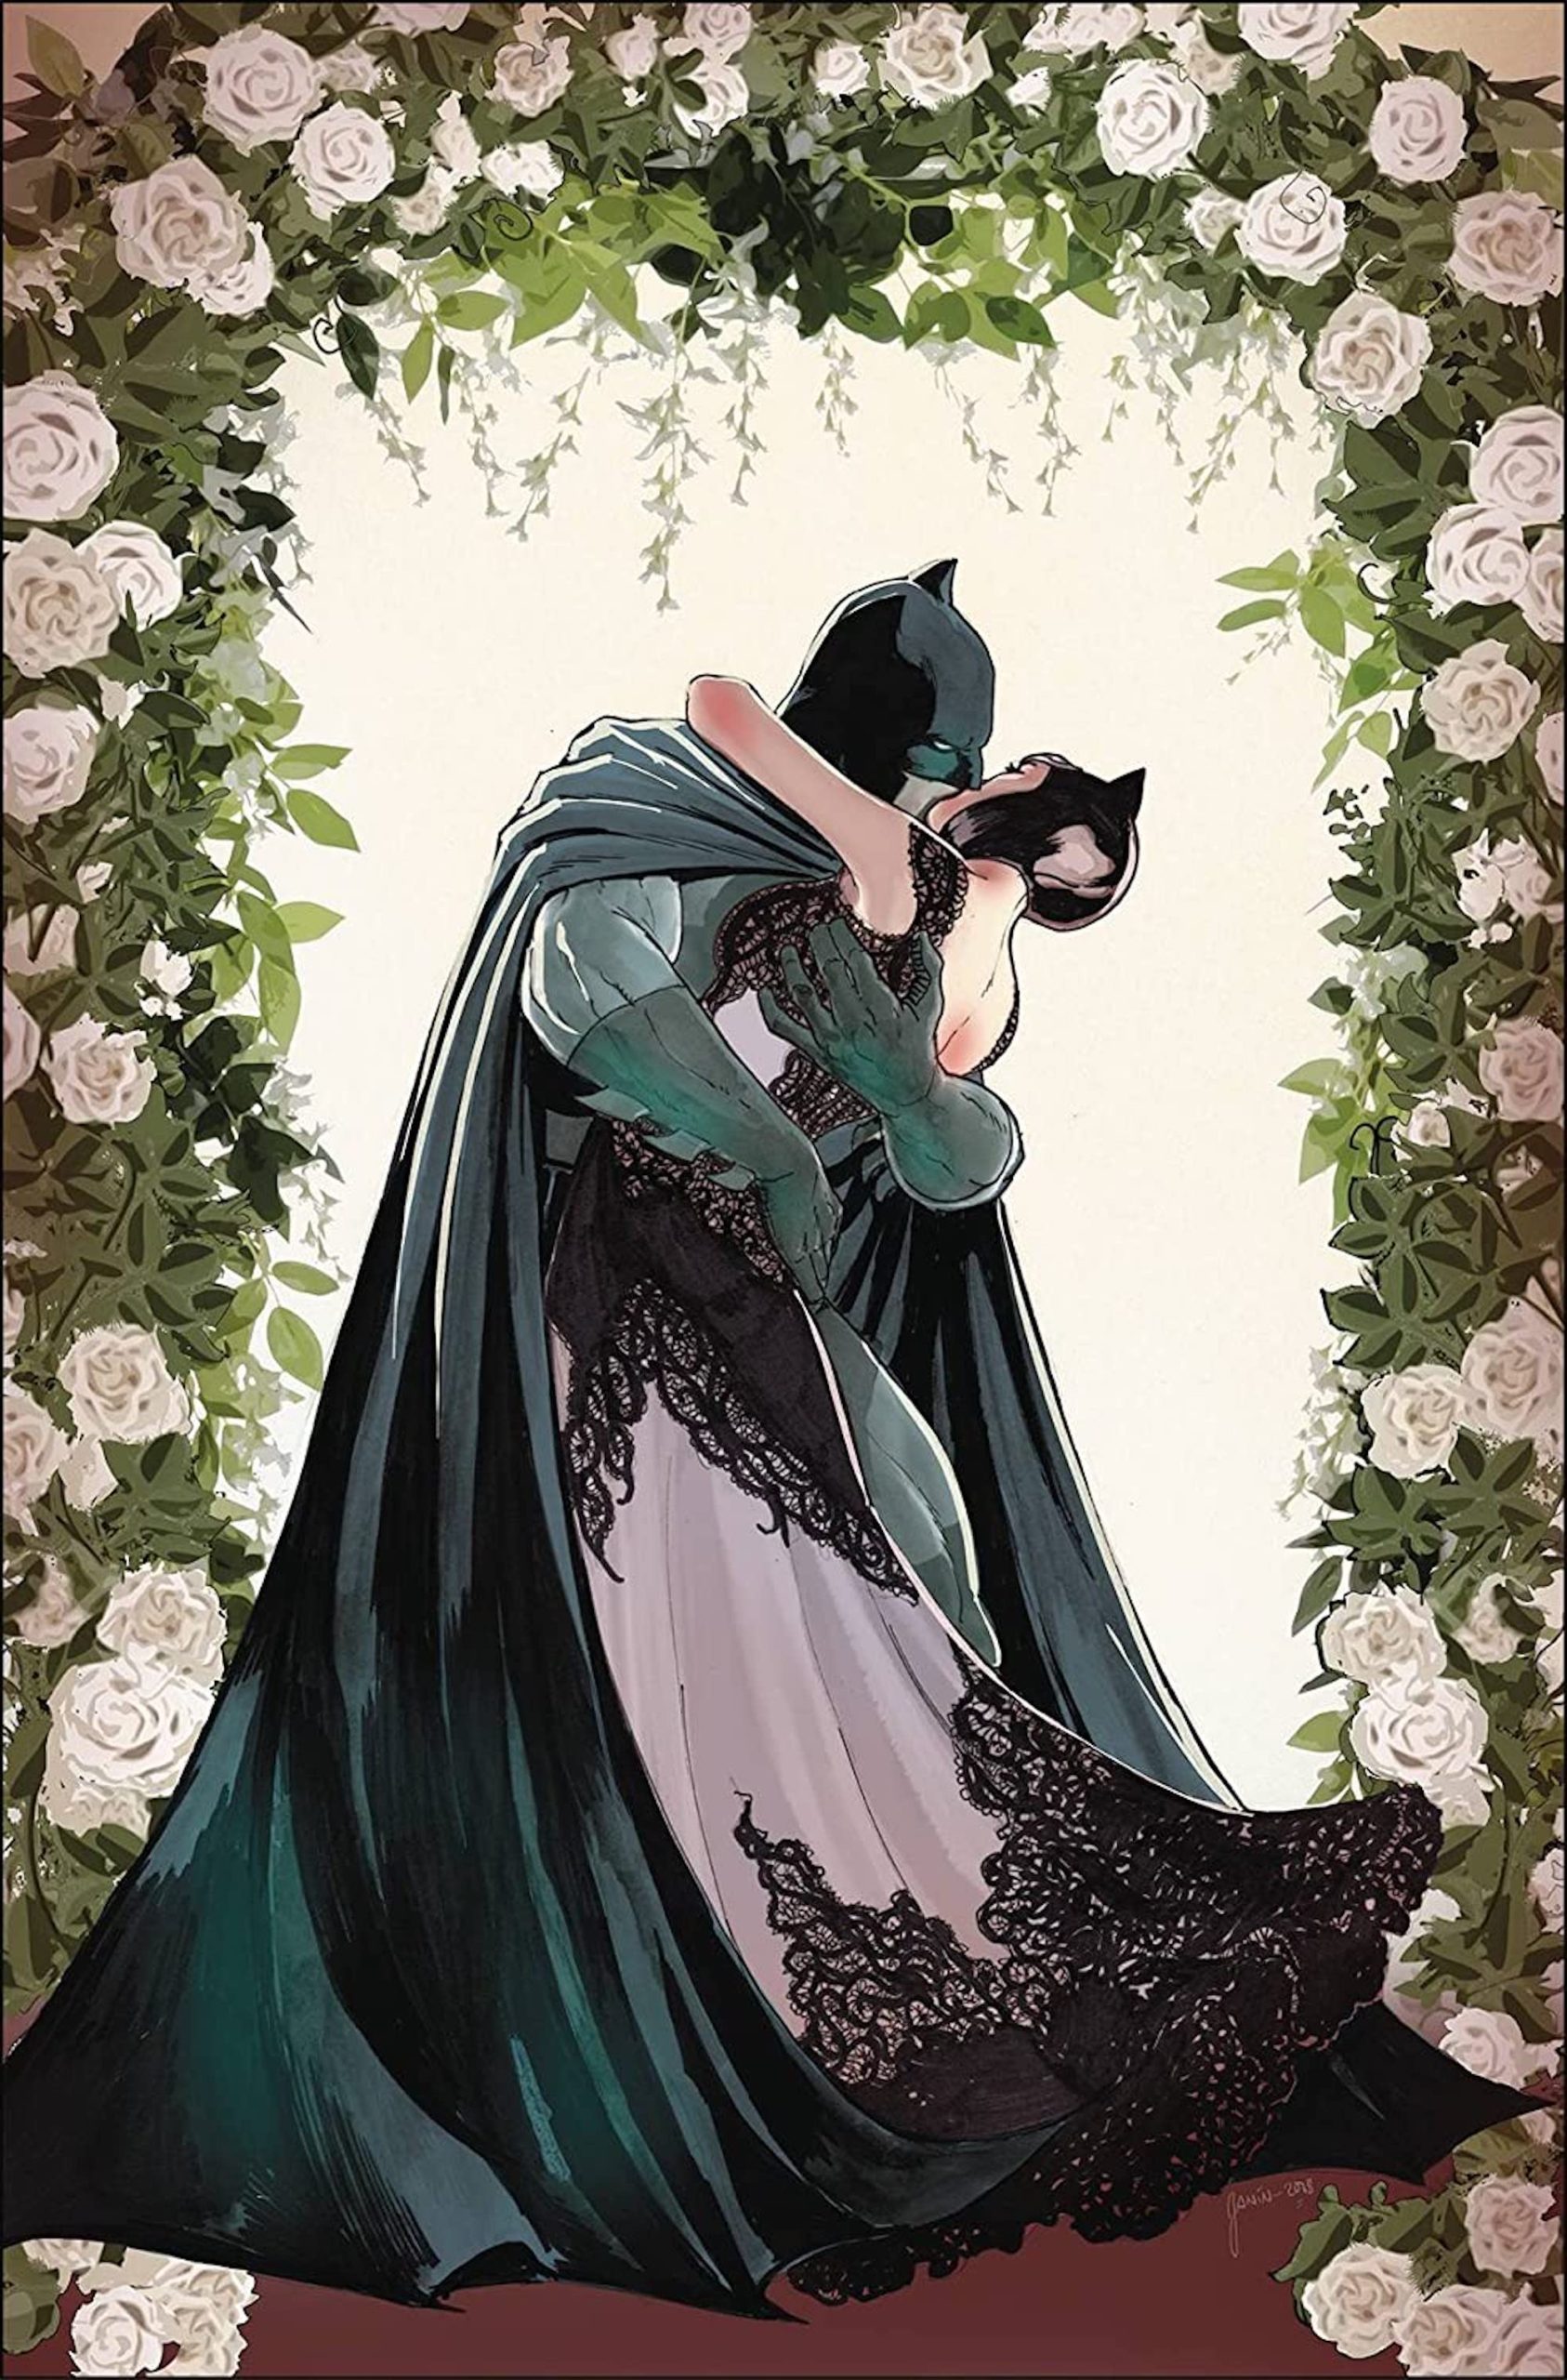 This is an image from Batman Vol. 7: The Wedding (2018), where Batman and Catwoman shared a passionate kiss on their wedding day.